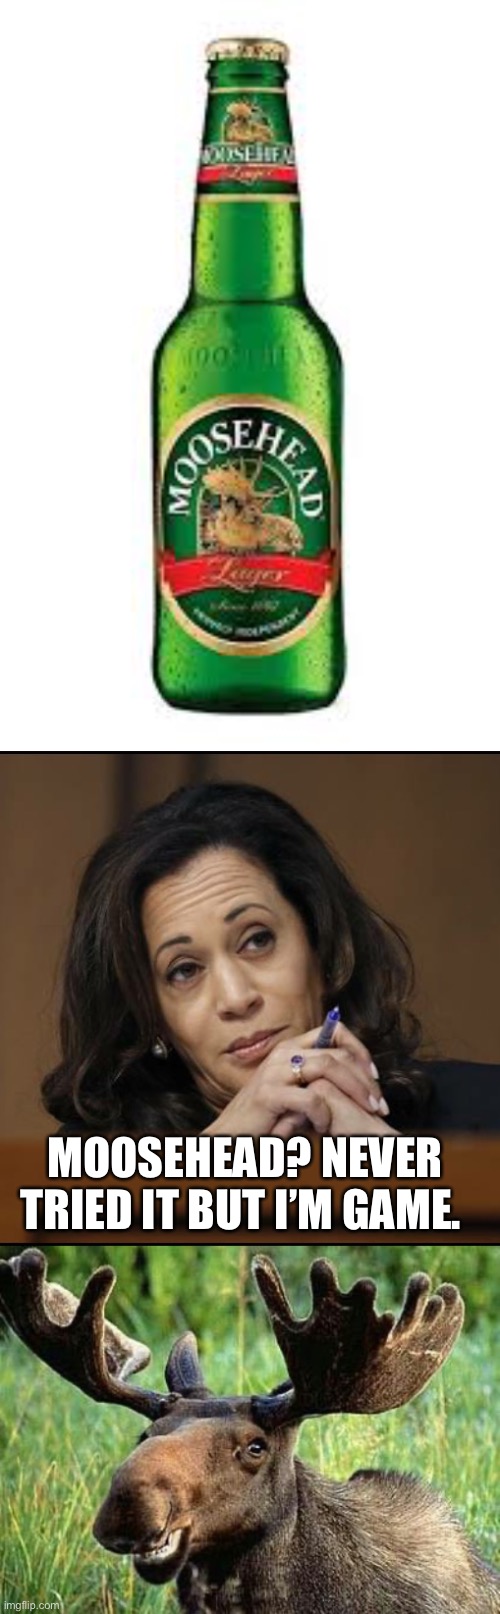 MOOSEHEAD? NEVER TRIED IT BUT I’M GAME. | image tagged in kamala harris | made w/ Imgflip meme maker